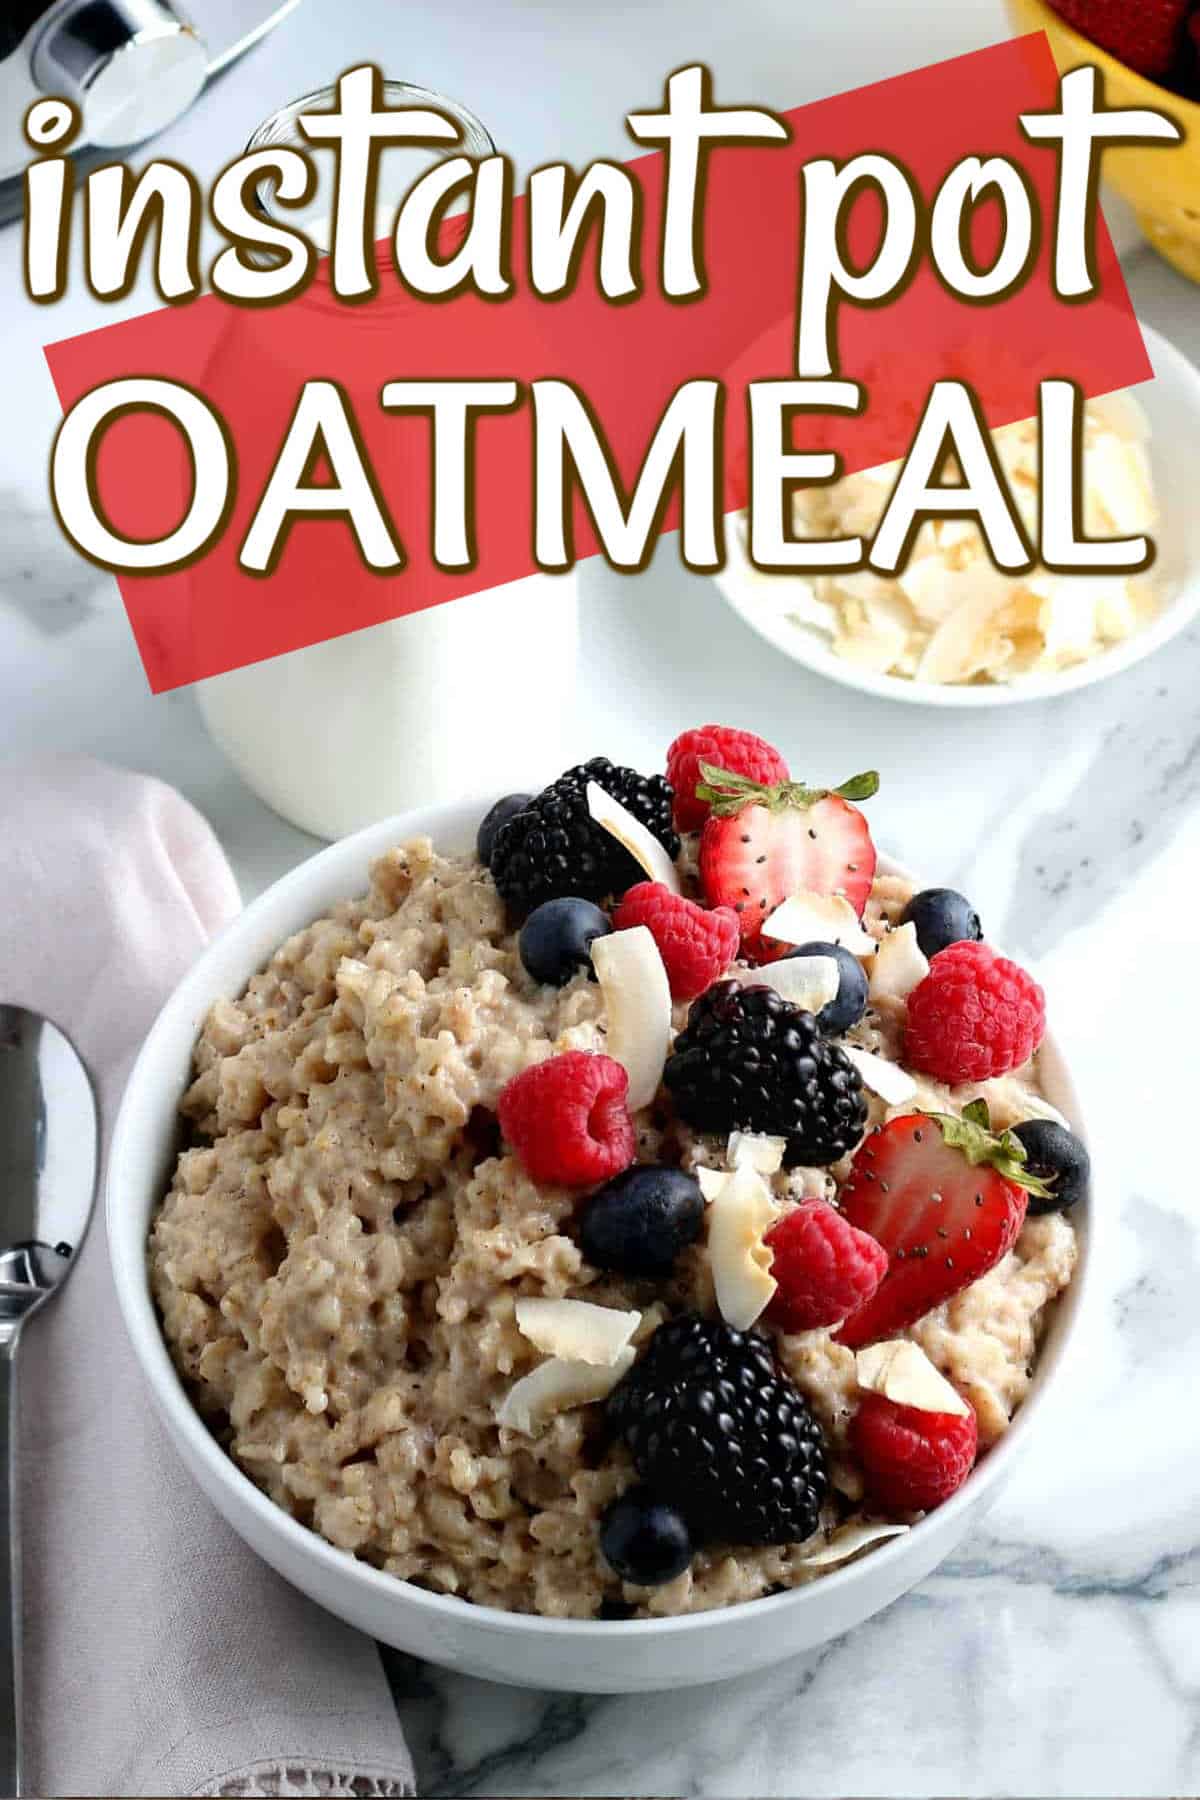 Tilted white bowl of oatmeal scattered with colorful berries with text above for Pinterest.